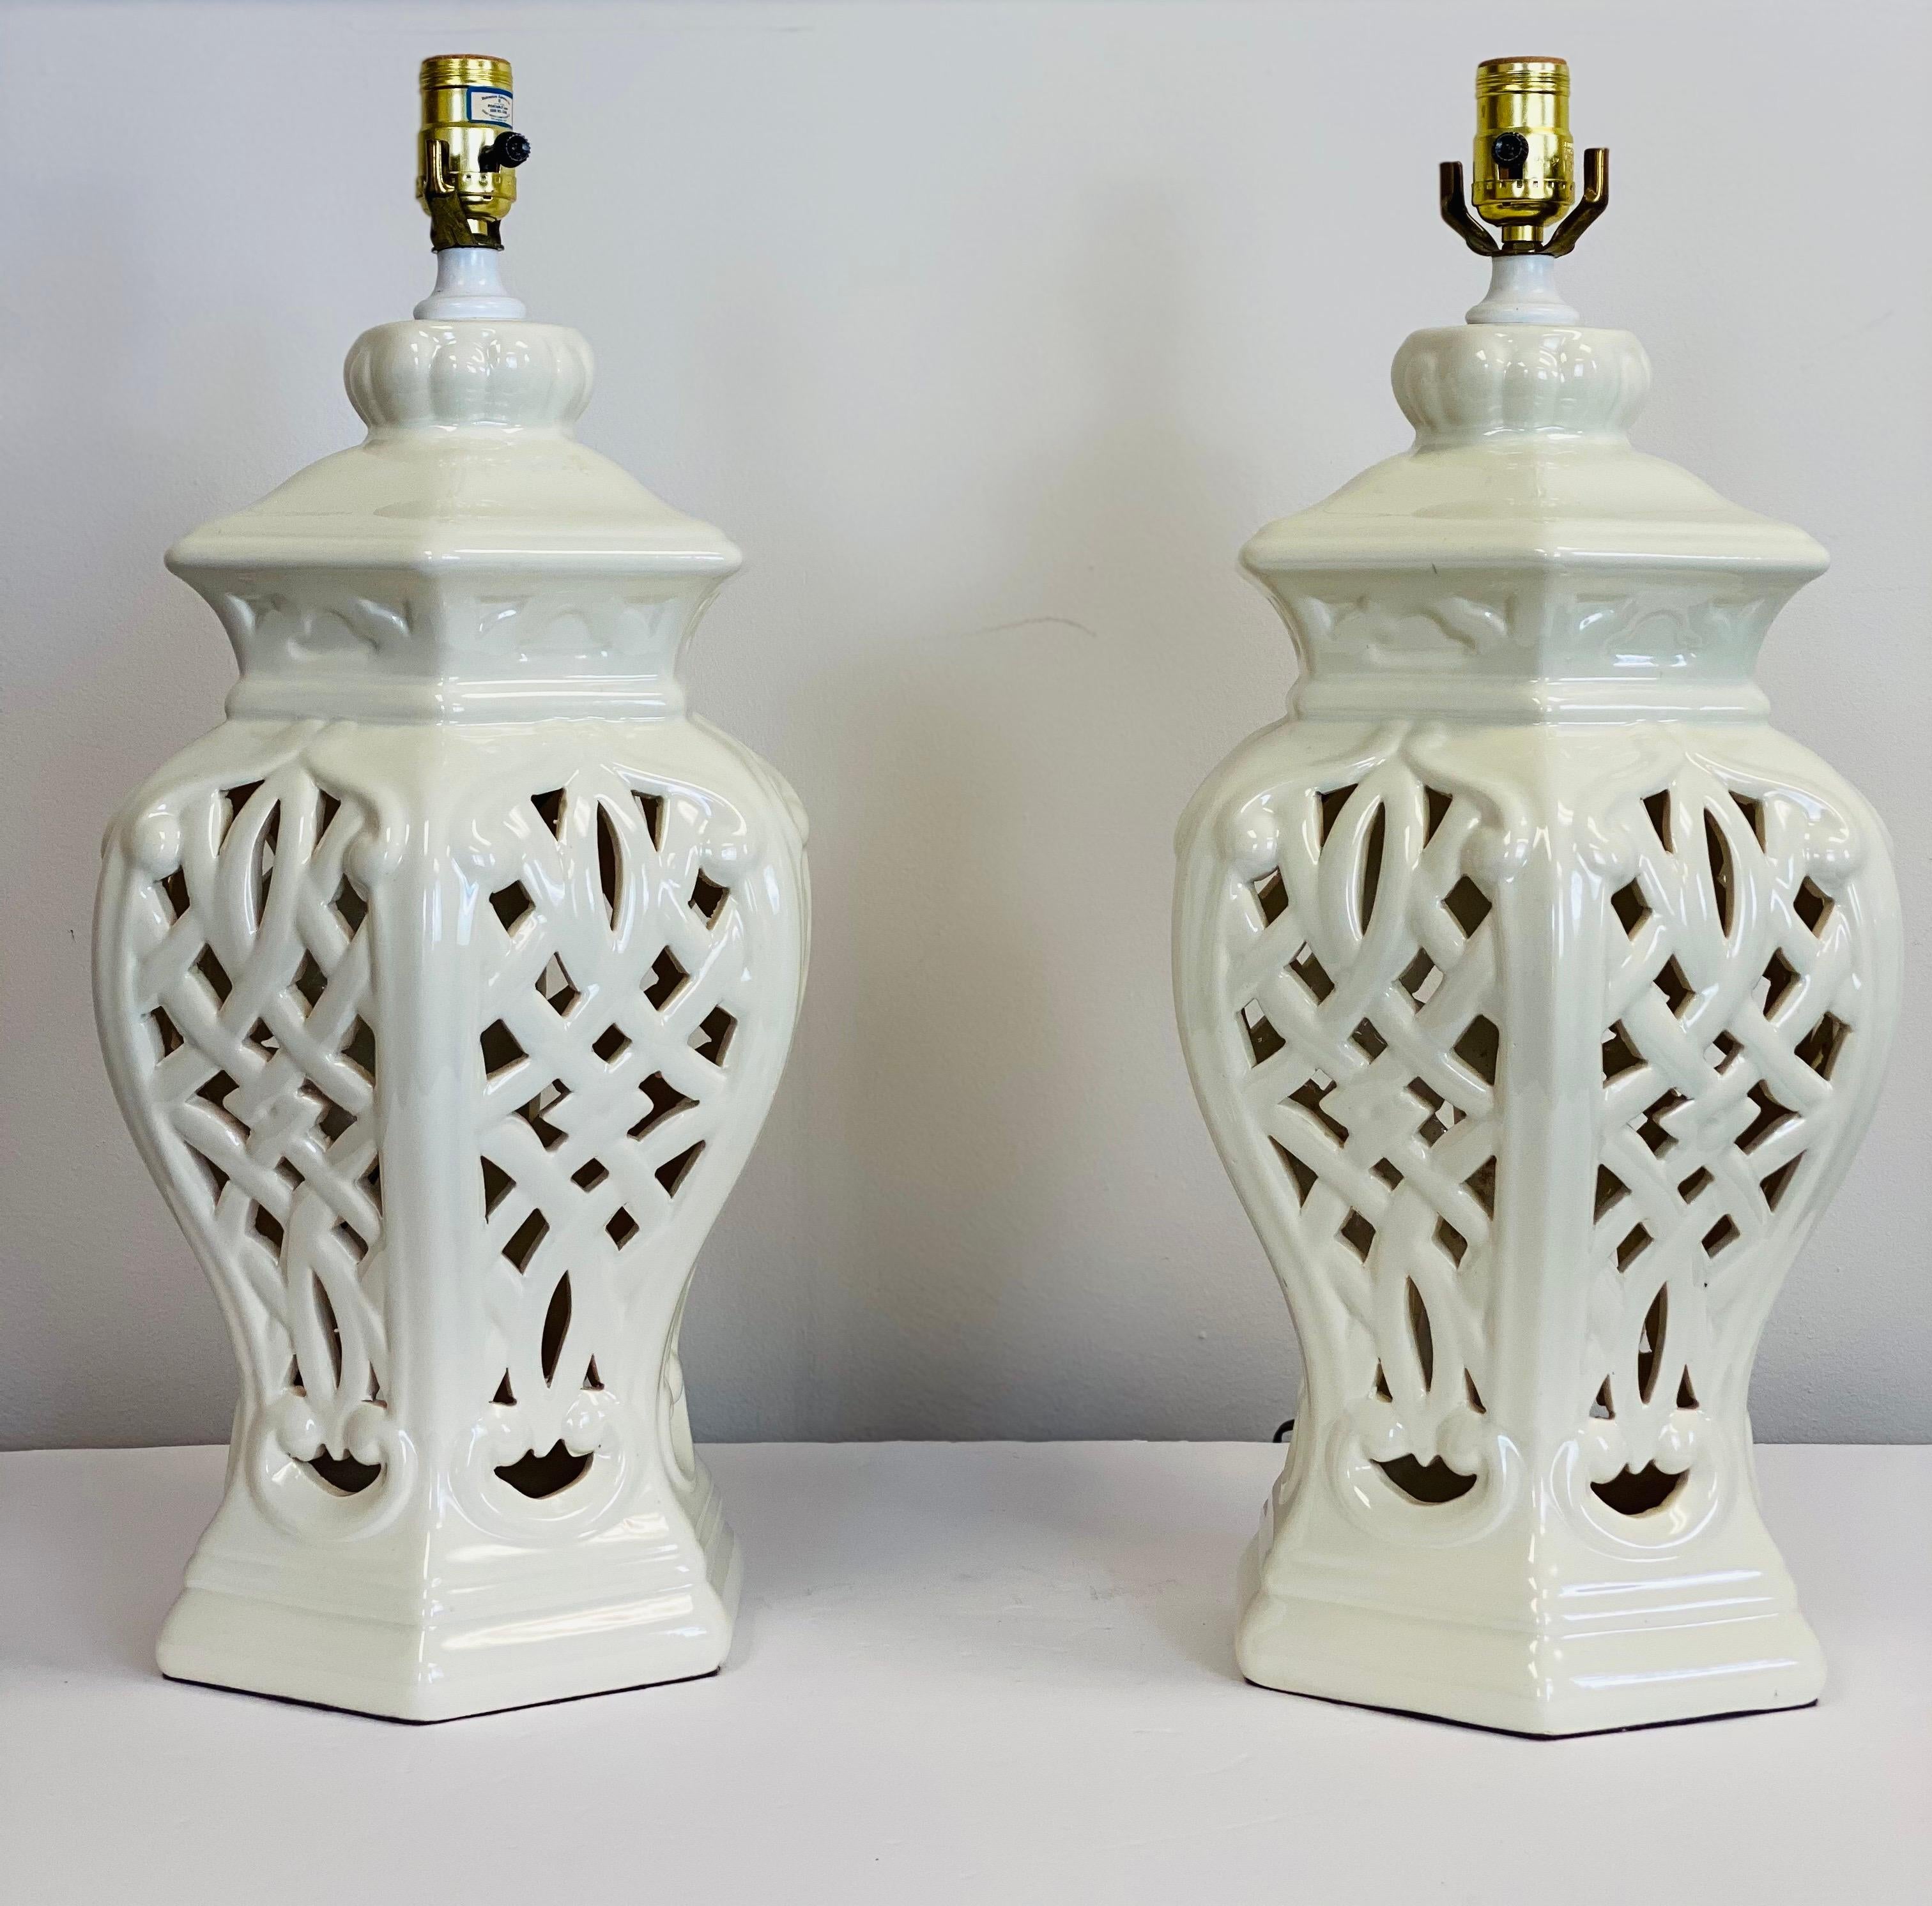 We are very pleased to offer a beautiful pair of reticulated white glazed porcelain lamps, circa the 1950s. These lamps were made by Light House Lamp & Shade Co, a Los Angeles based manufacturer and designer of lamps. The shades unique curvilinear